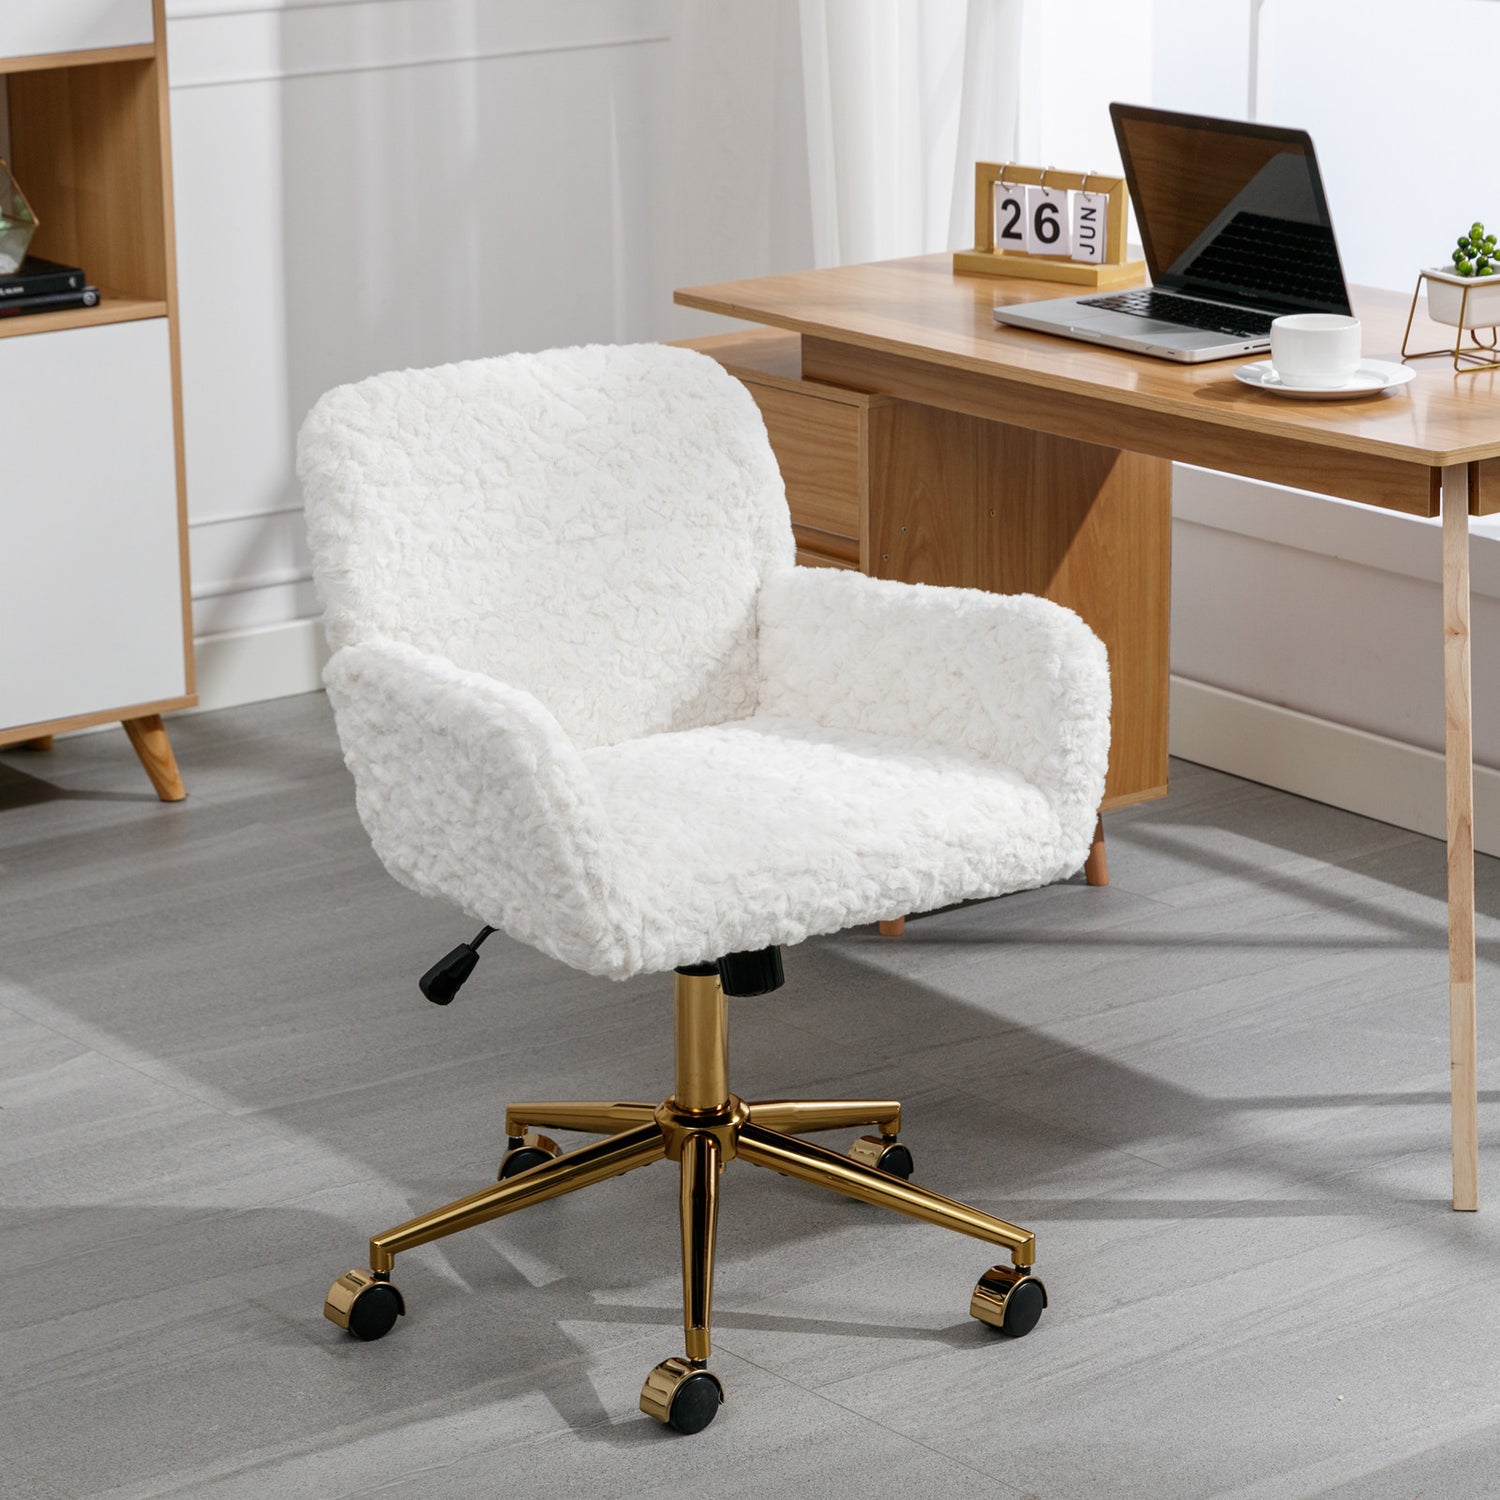 A&A Furniture Office Chair,Artificial rabbit hair Home Office Chair with Golden Metal Base,Adjustable Desk Chair Swivel Office Chair,Vanity Chair(Beige)